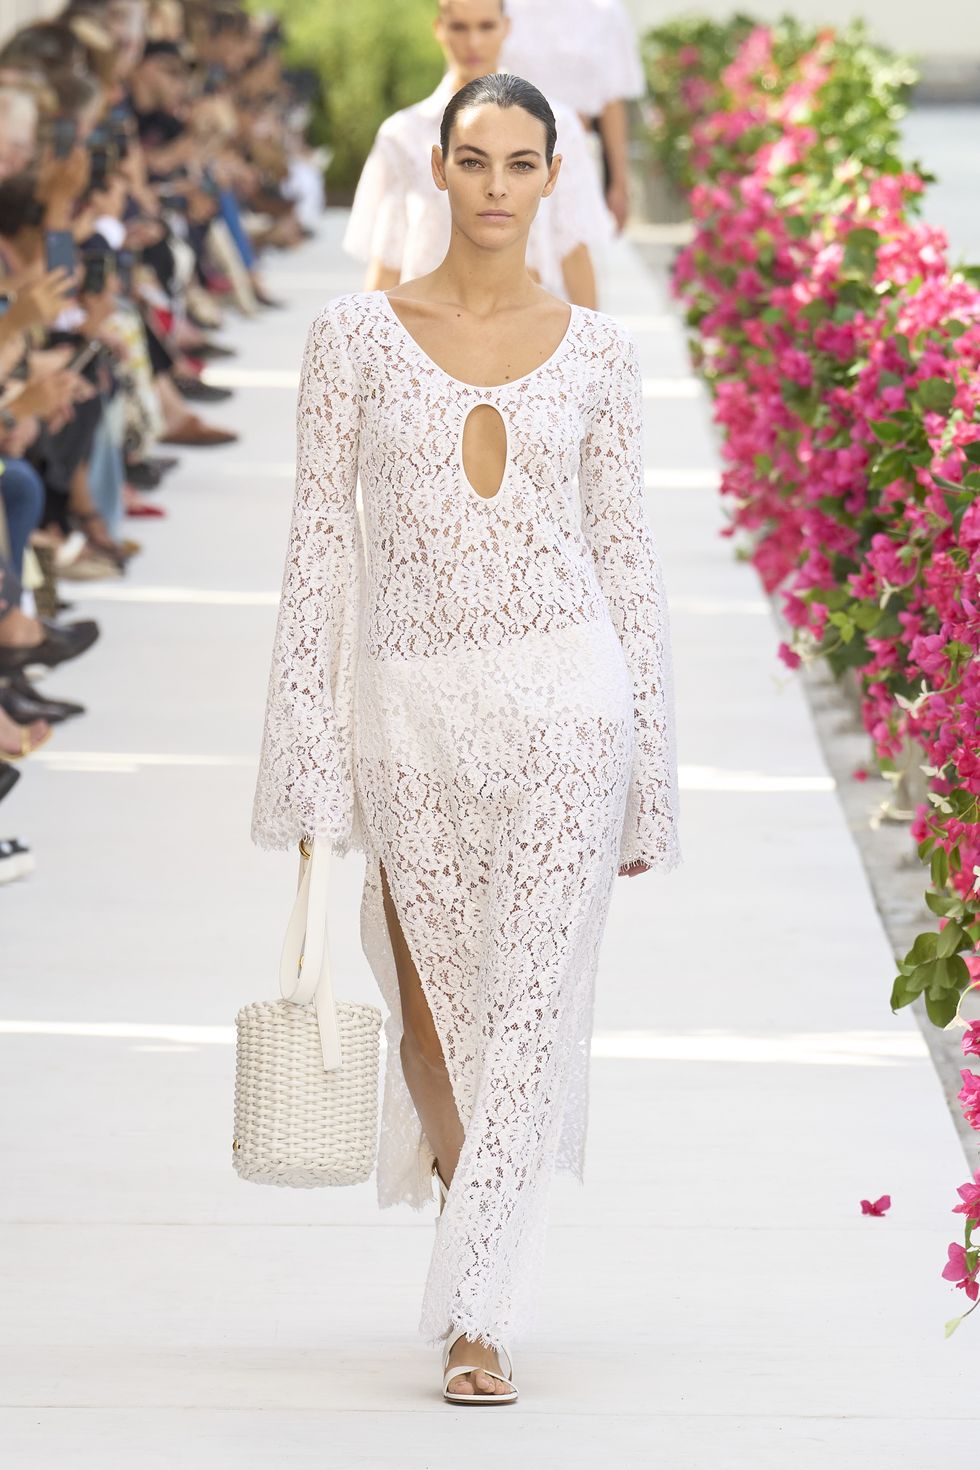 Michael Kors Collection News, Collections, Fashion Shows, Fashion Week  Reviews, and More